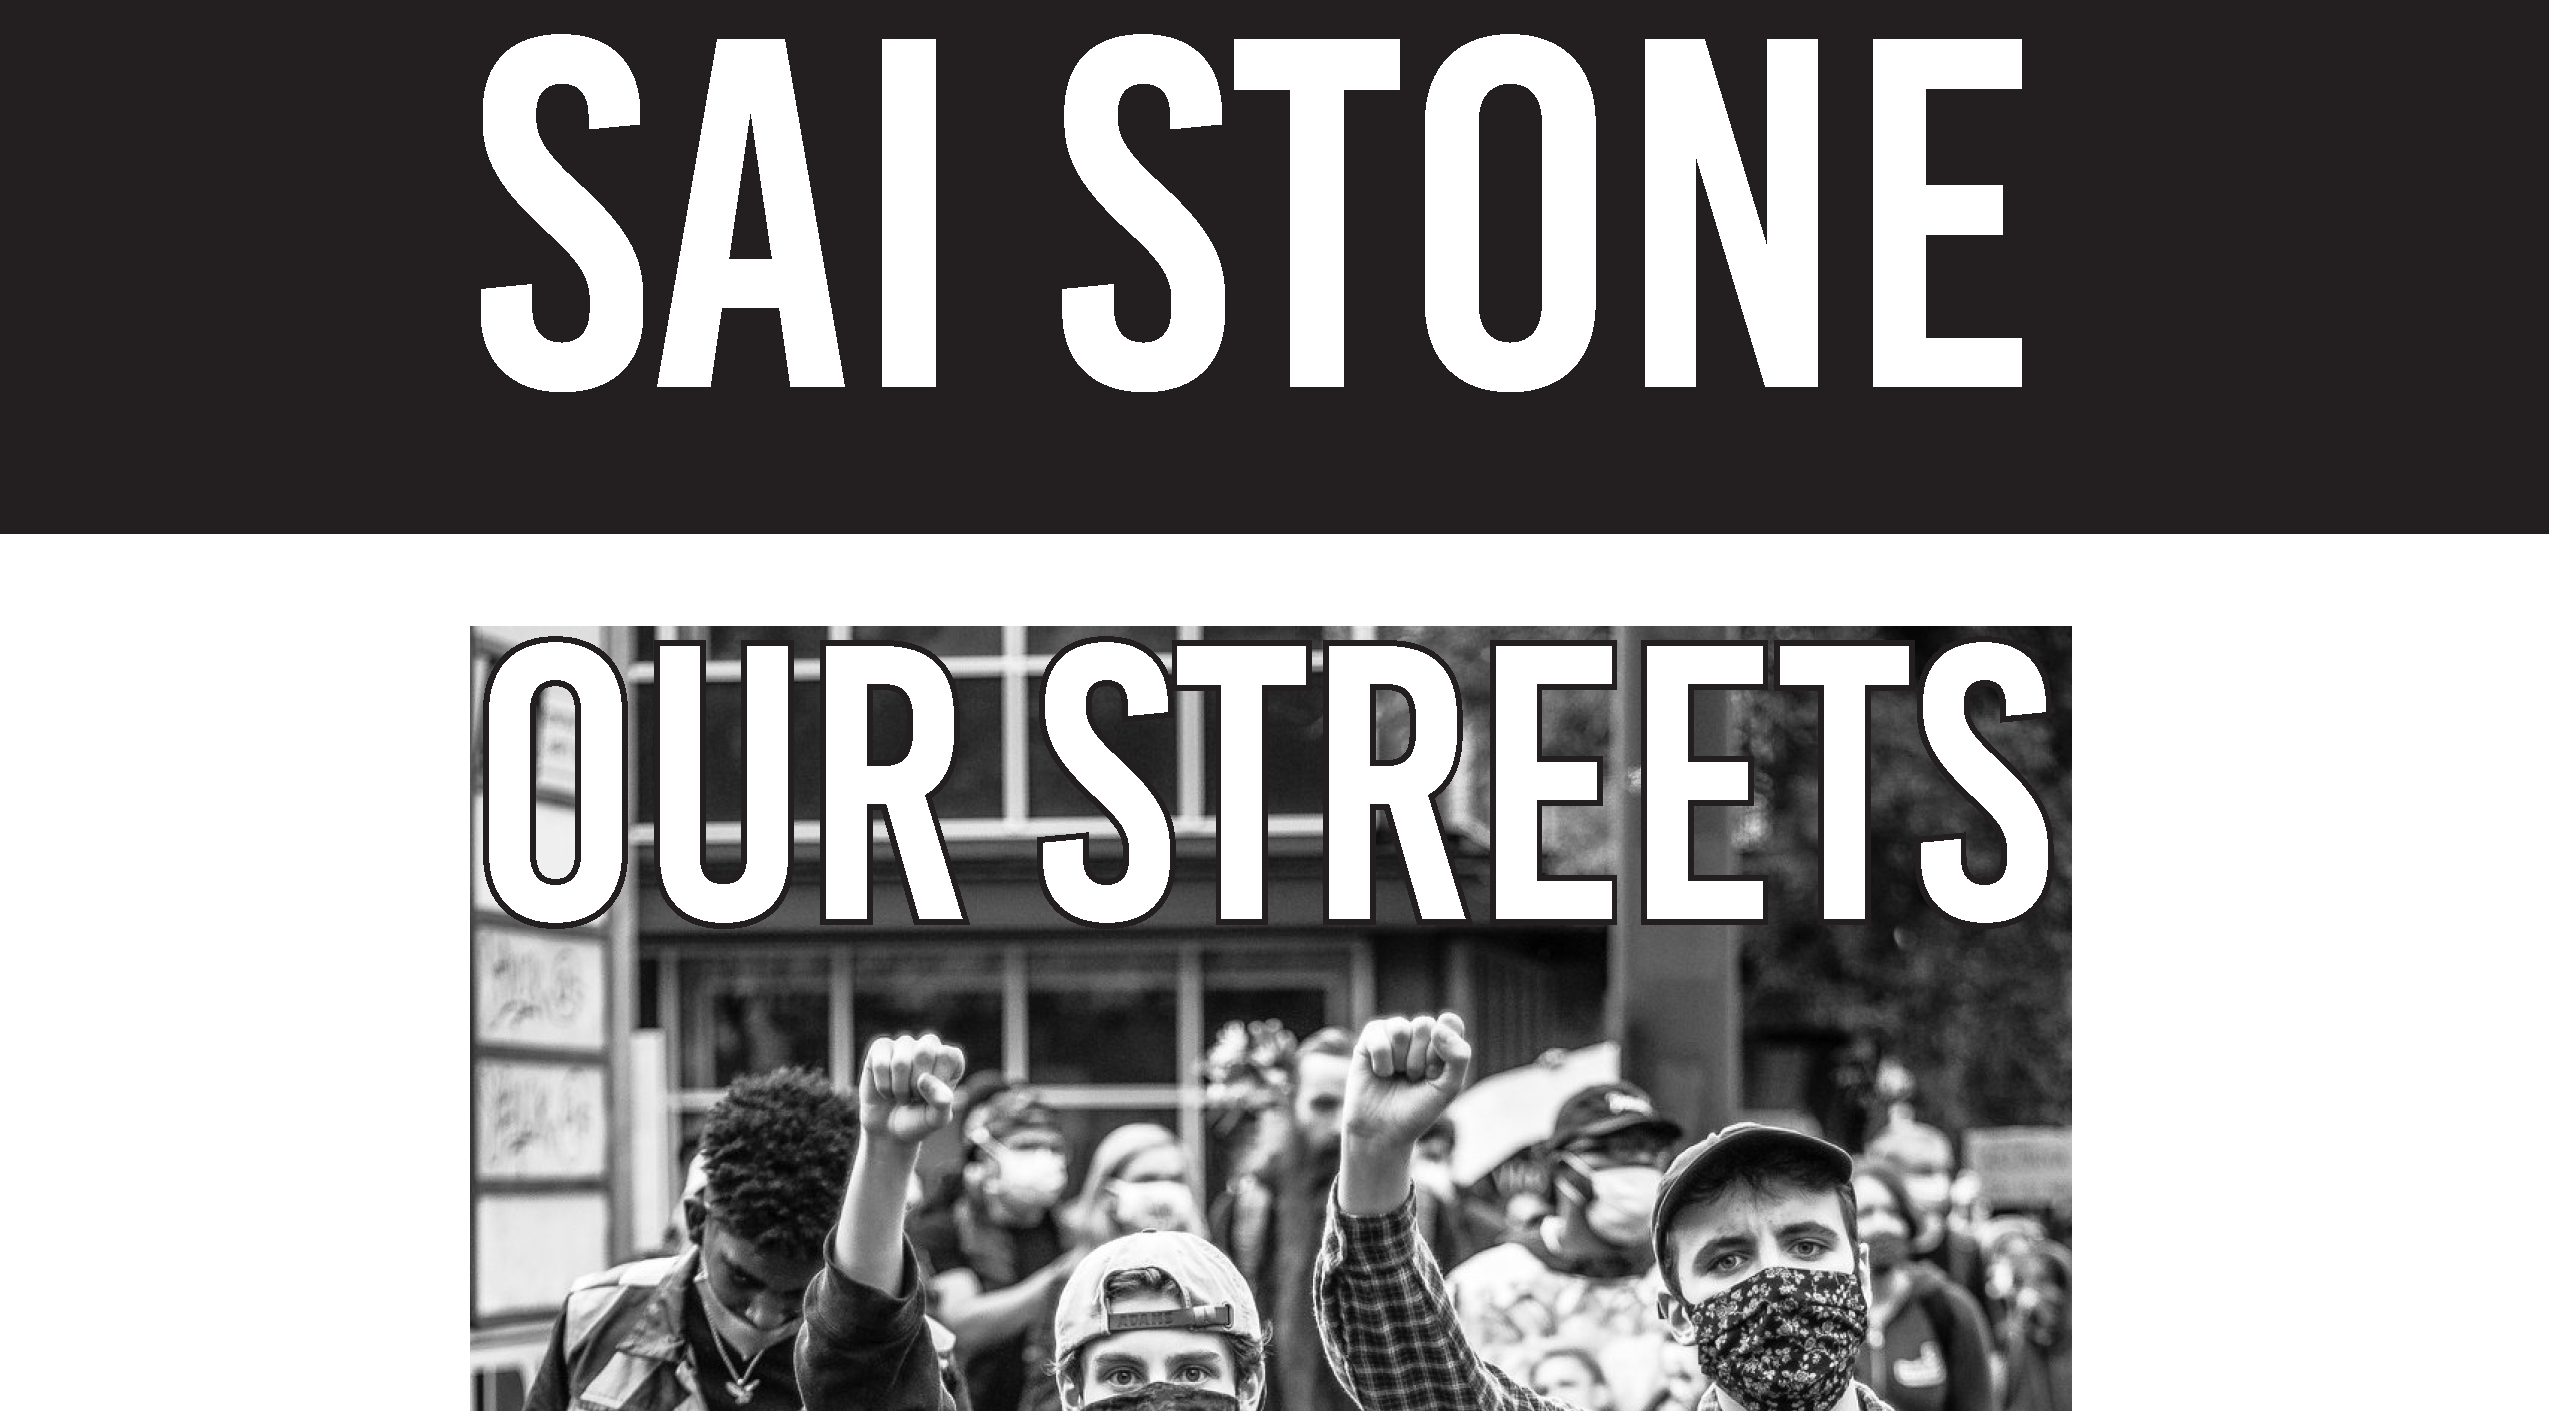 Photojournalism book “Our Streets” is available for purchase! [Photography]